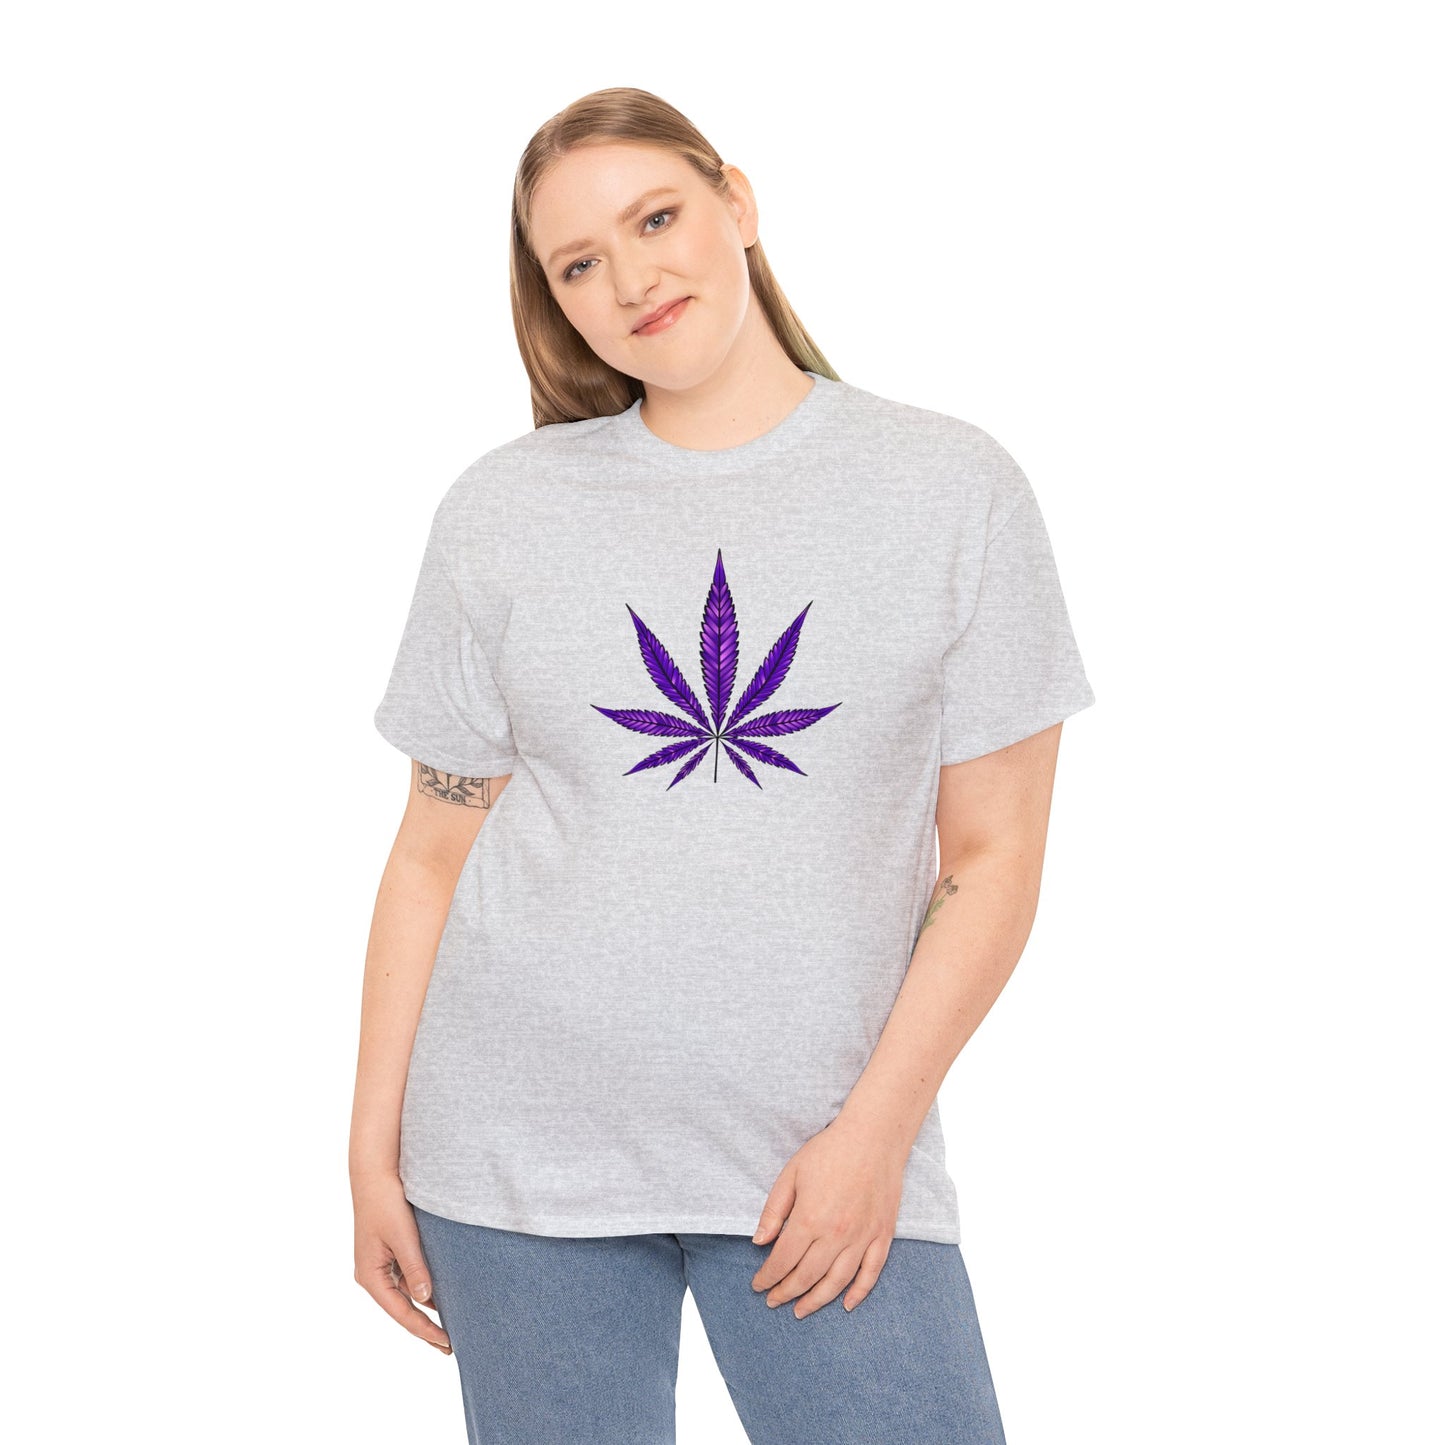 A woman wearing a grey t-shirt with a vibrant Purple Cannabis Leaf Tee design on the front, symbolizing marijuana culture.